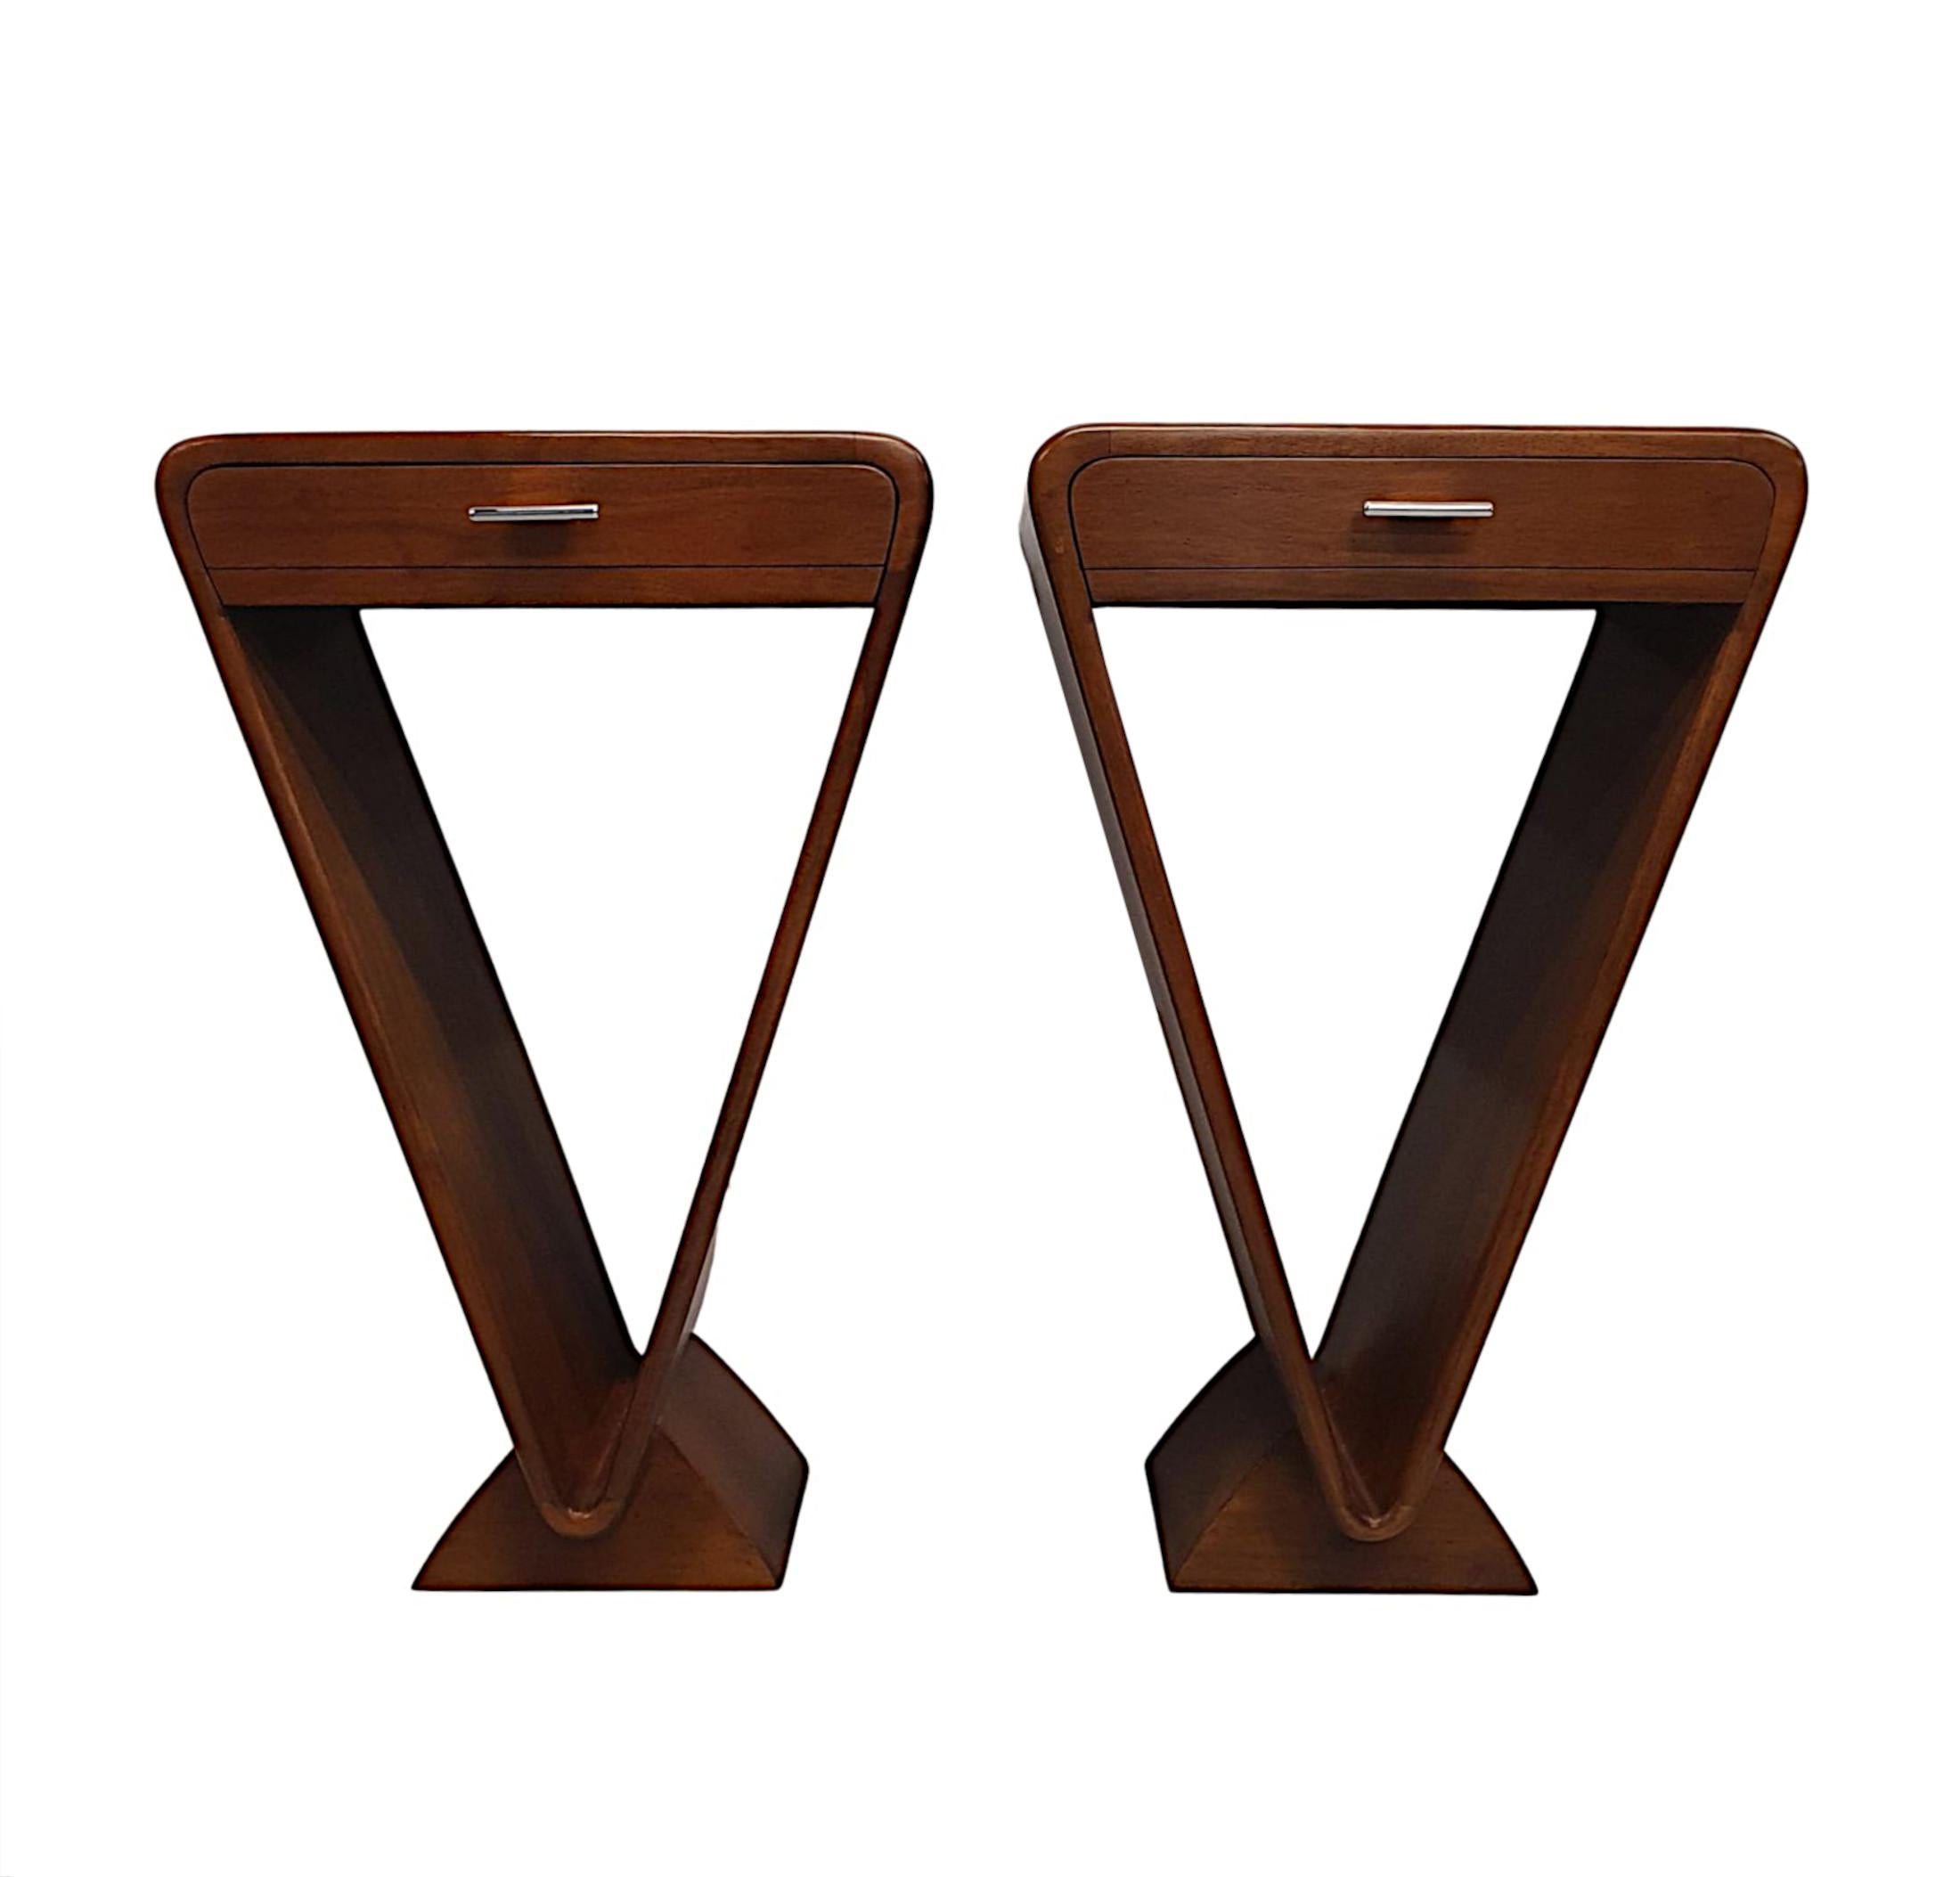 A fabulous contemporary pair of cherrywood bedside or side tables in the Art Deco style, of gorgeous quality with a clean curvilinear design and superb patination to the wood. The moulded curved top raised over single drawer frieze above a